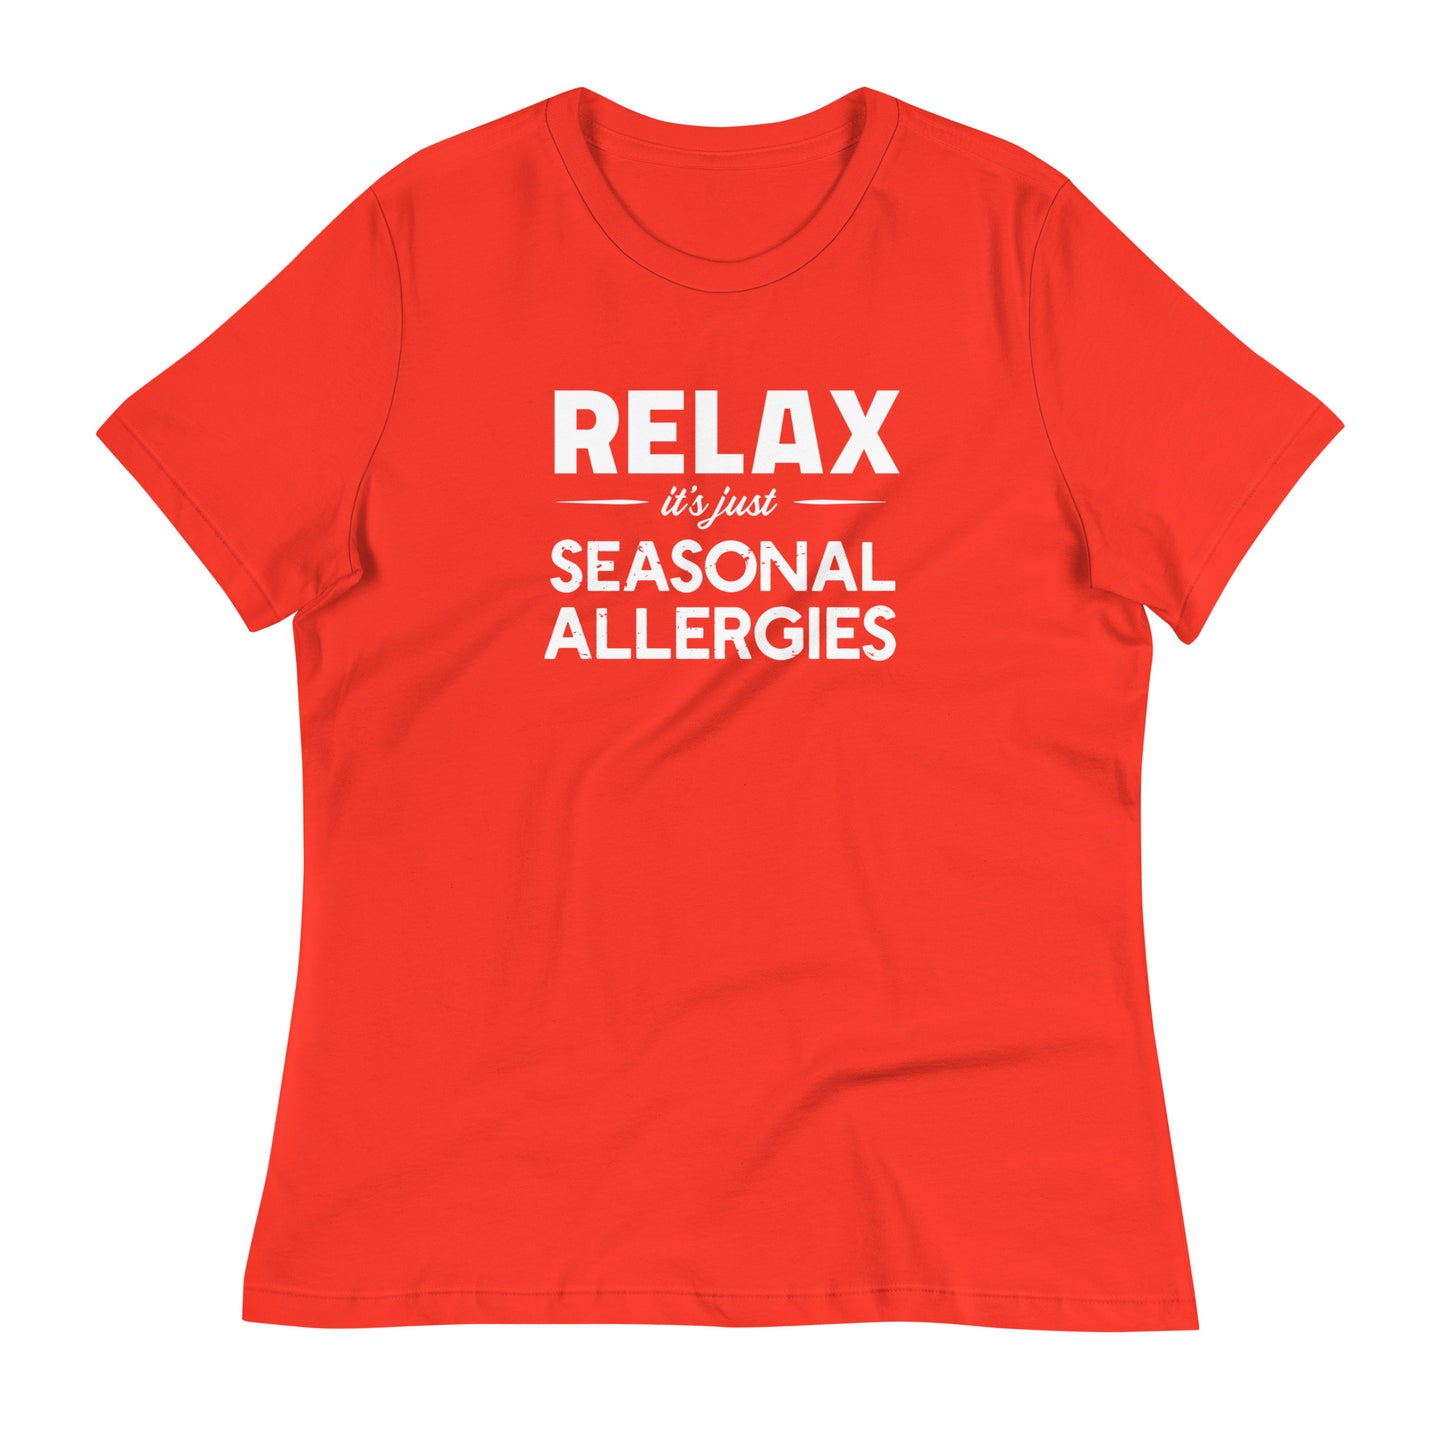 Poppy (bright red) women's relaxed fit t-shirt with white graphic: "RELAX it's just SEASONAL ALLERGIES"